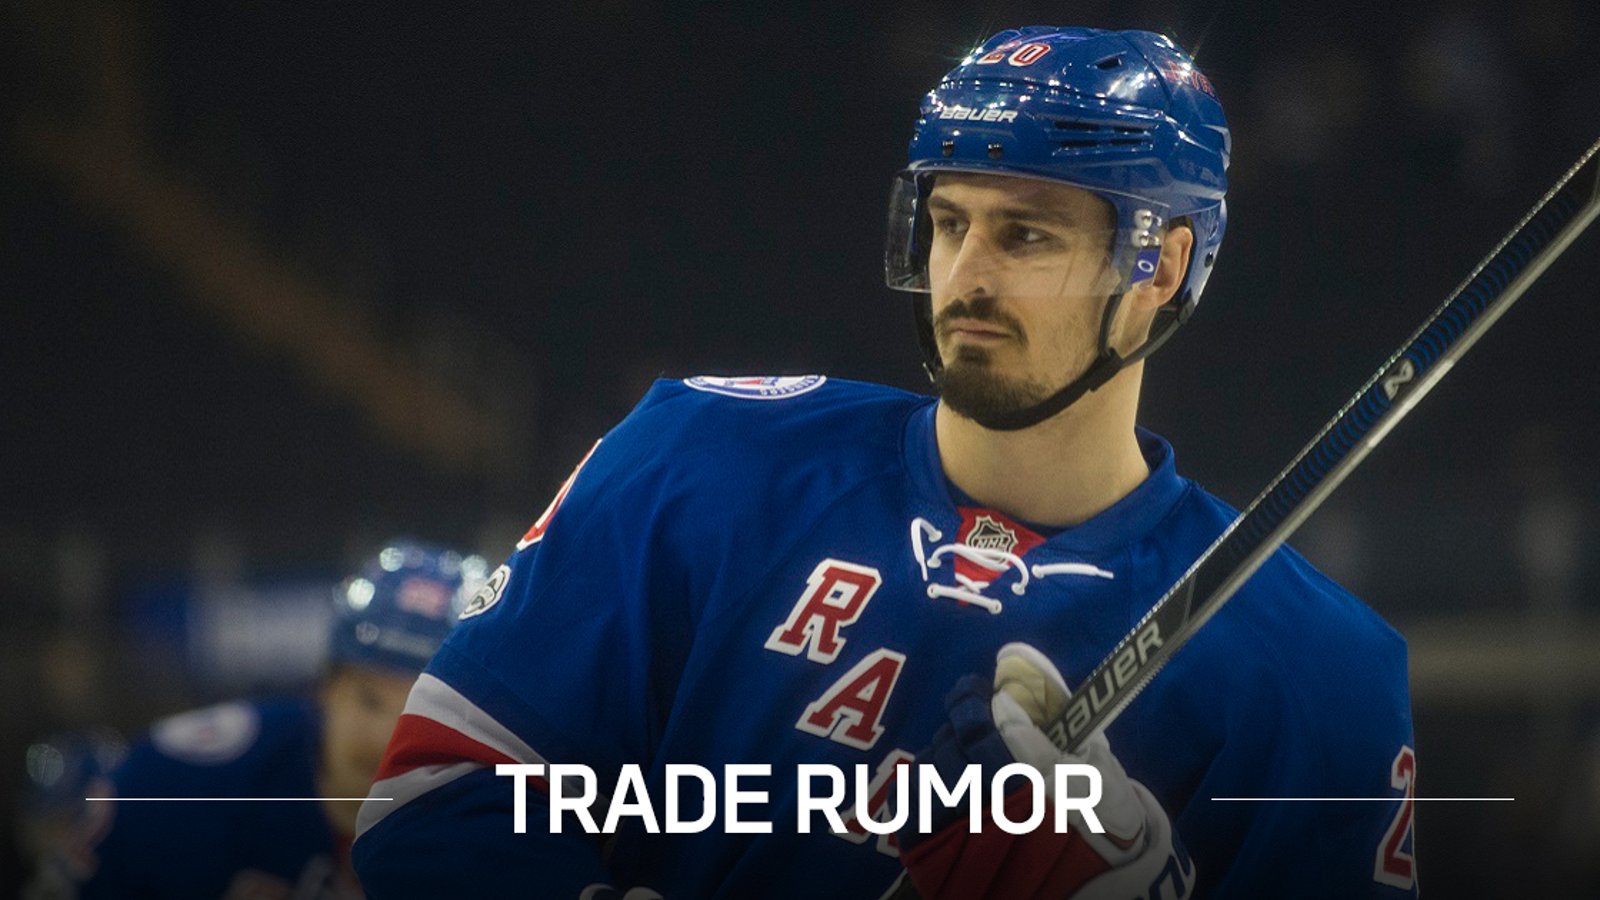 Insider believes Rangers seriously contemplating trading two of their top forwards.